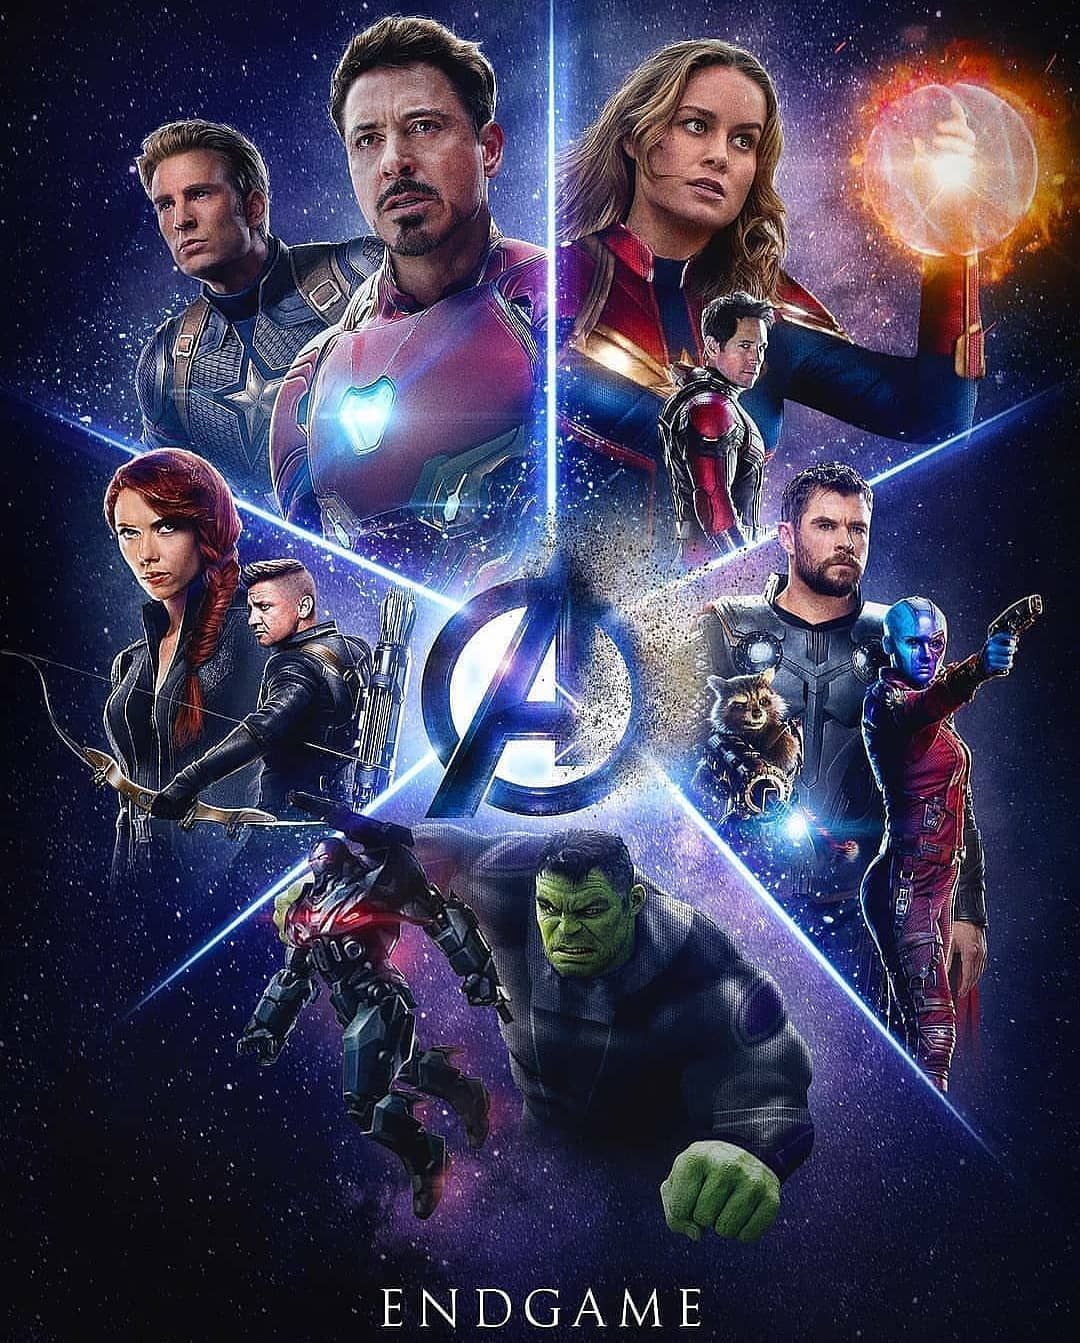 Avengers Endgame Wallpapers in HD For Android and iPhone